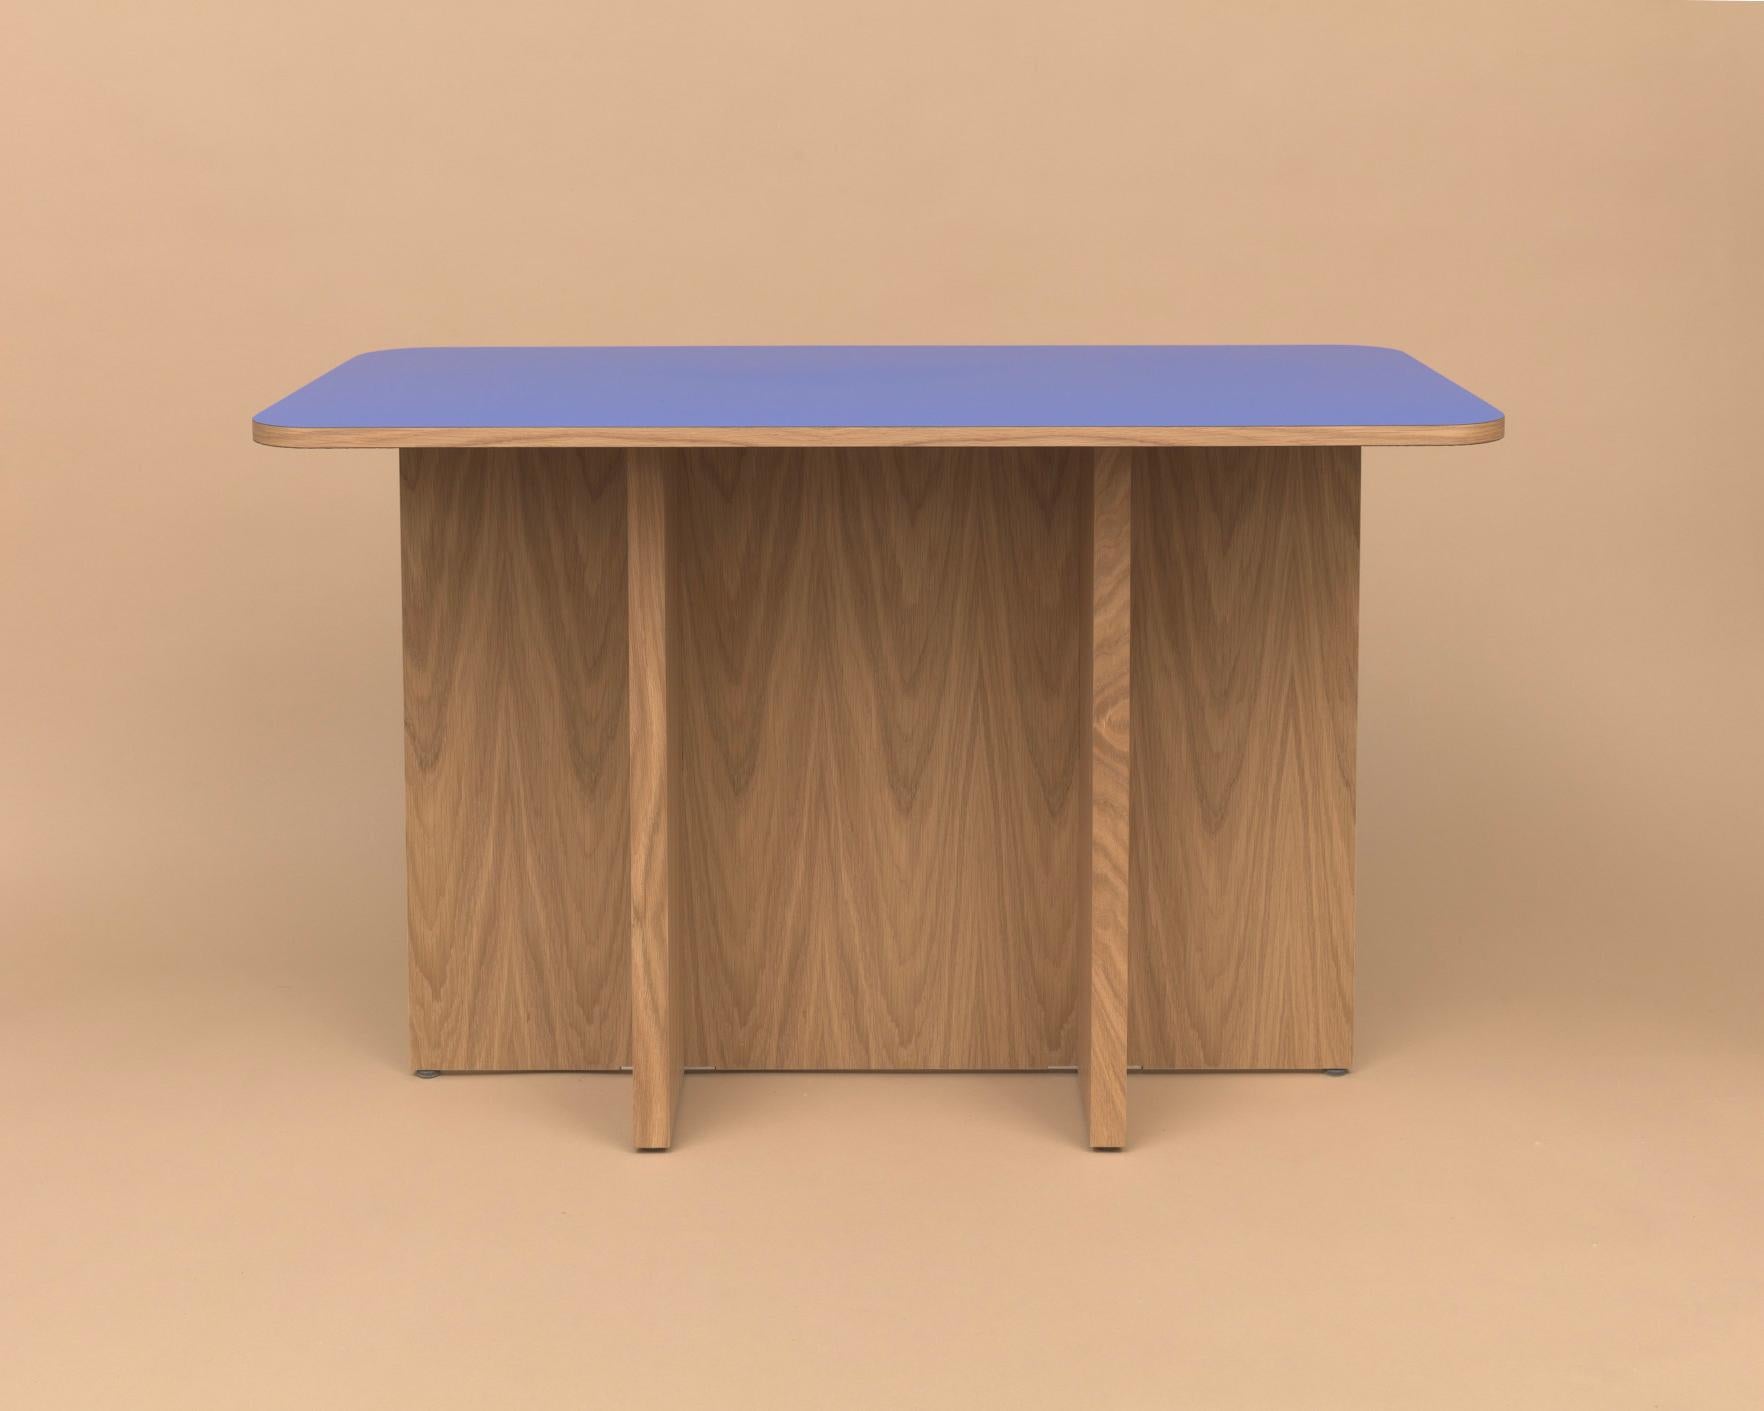 Modern T-Top Dining Table in White Oak Veneered Plywood and Colorful Laminate